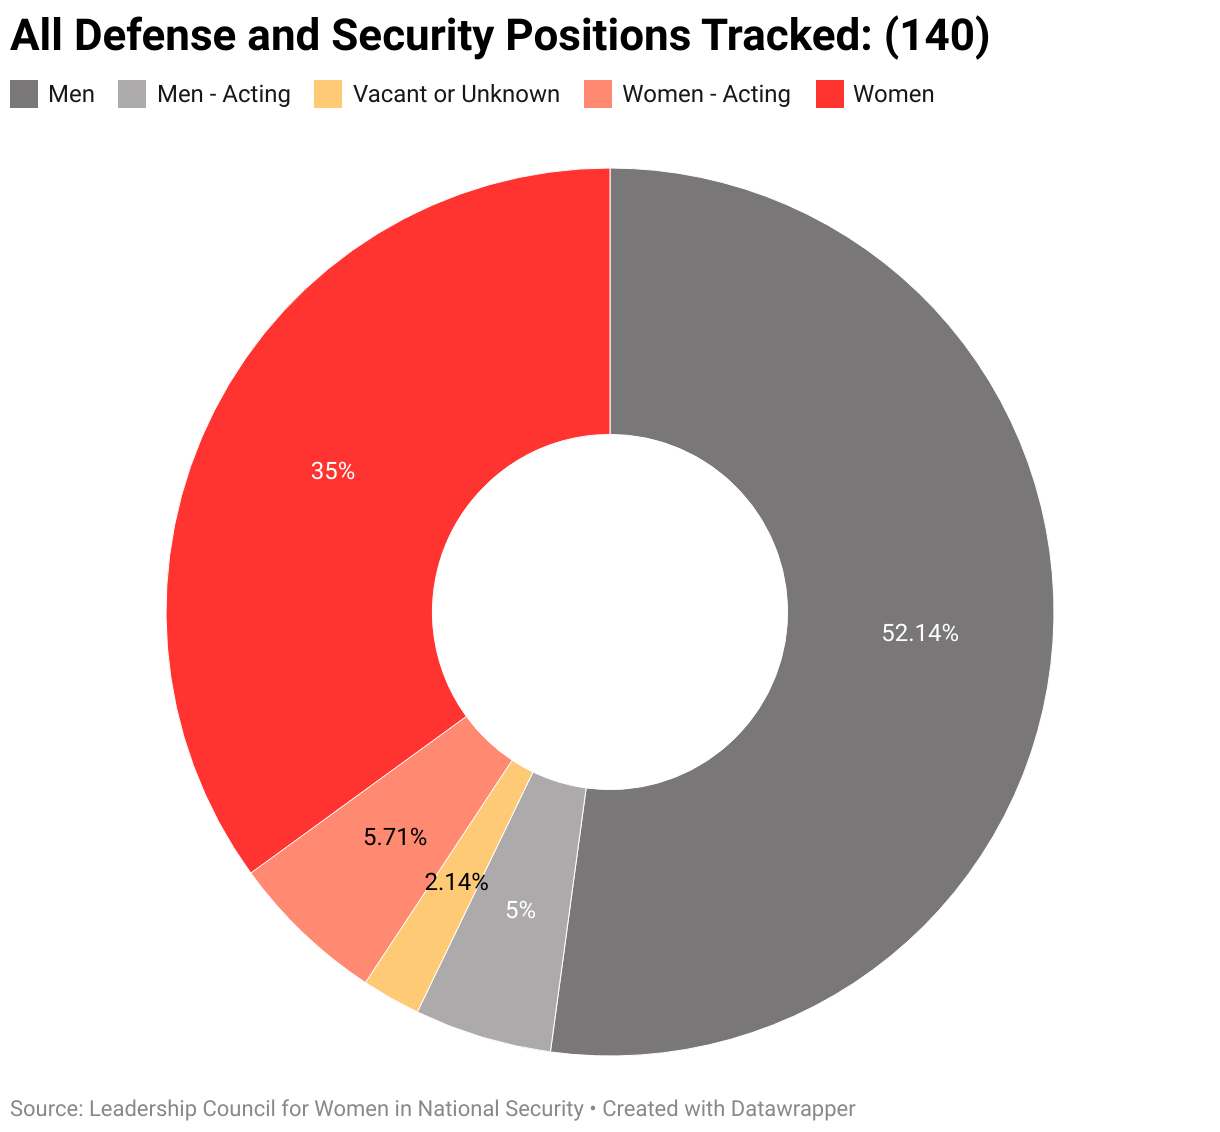 The gendered breakdown of all defense and security positions positions tracked by LCWINS (140).